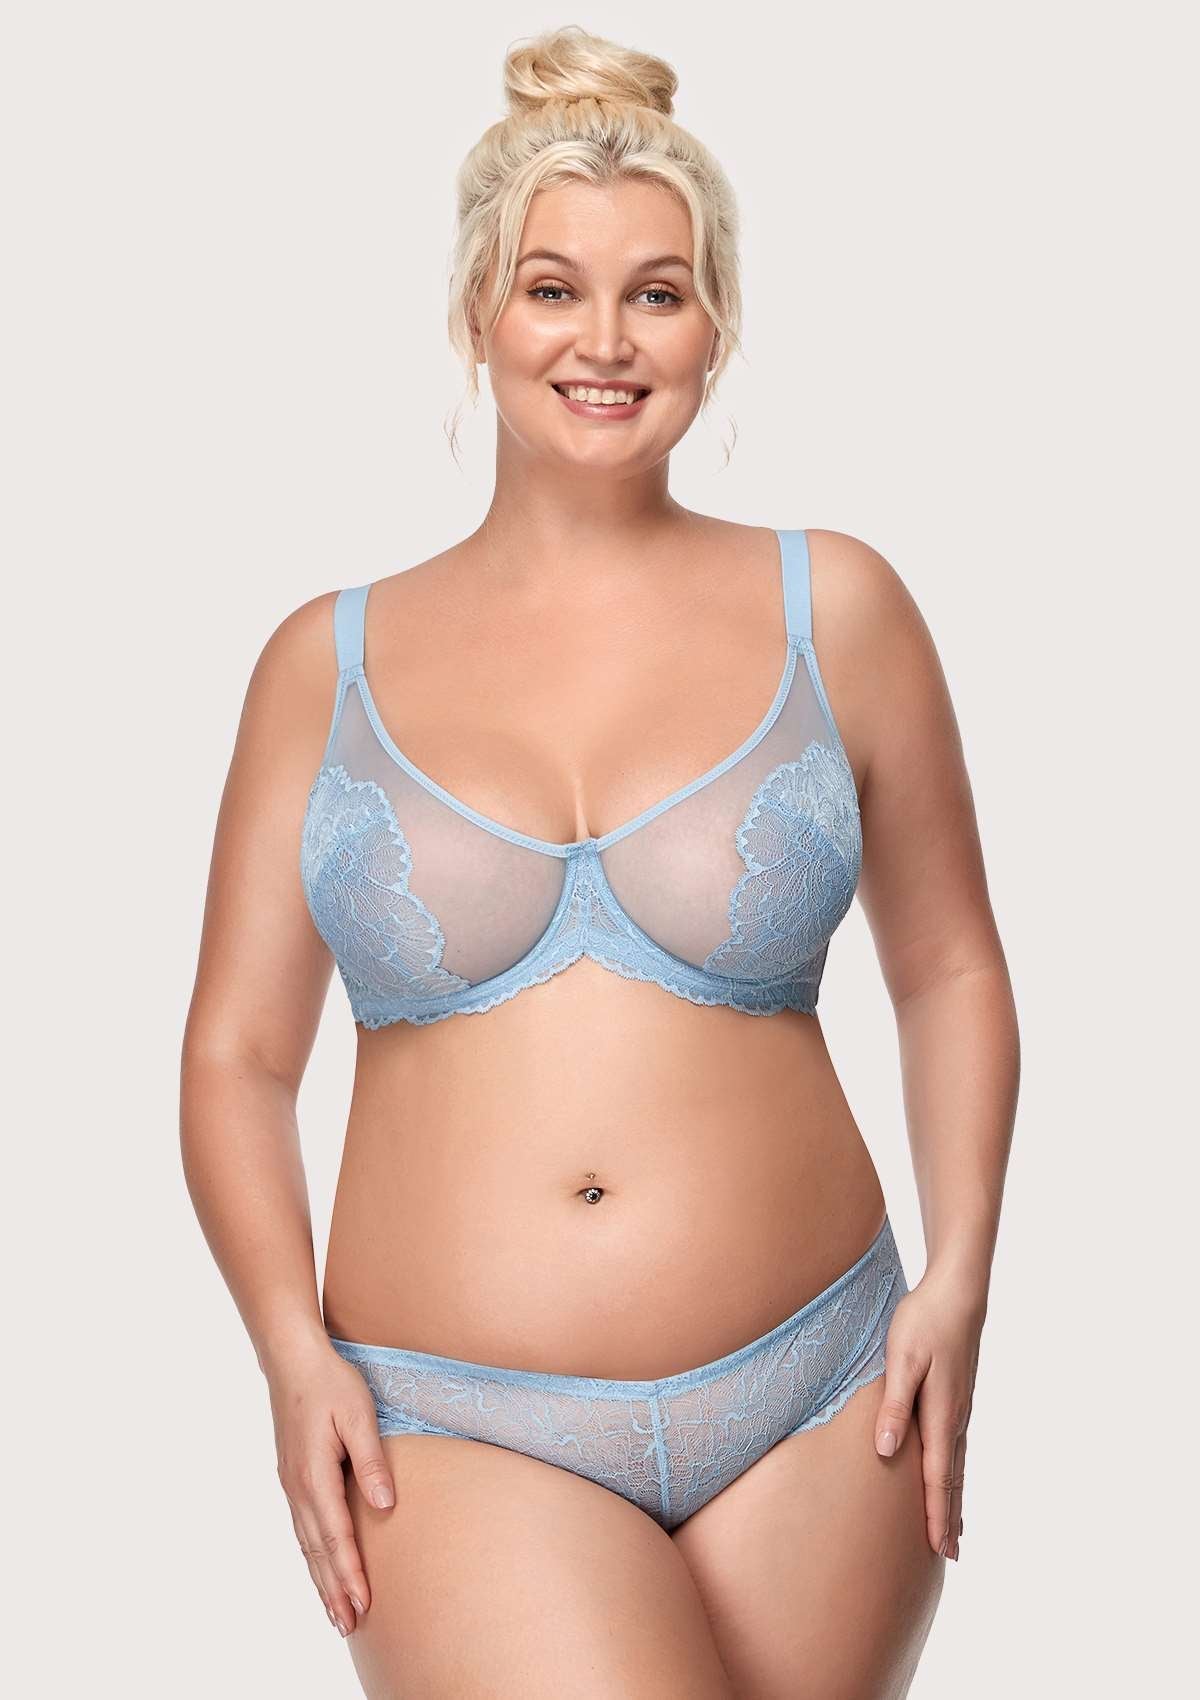 HSIA Blossom Full Coverage Supportive Unlined Underwire Bra Set - Storm Blue / 34 / D